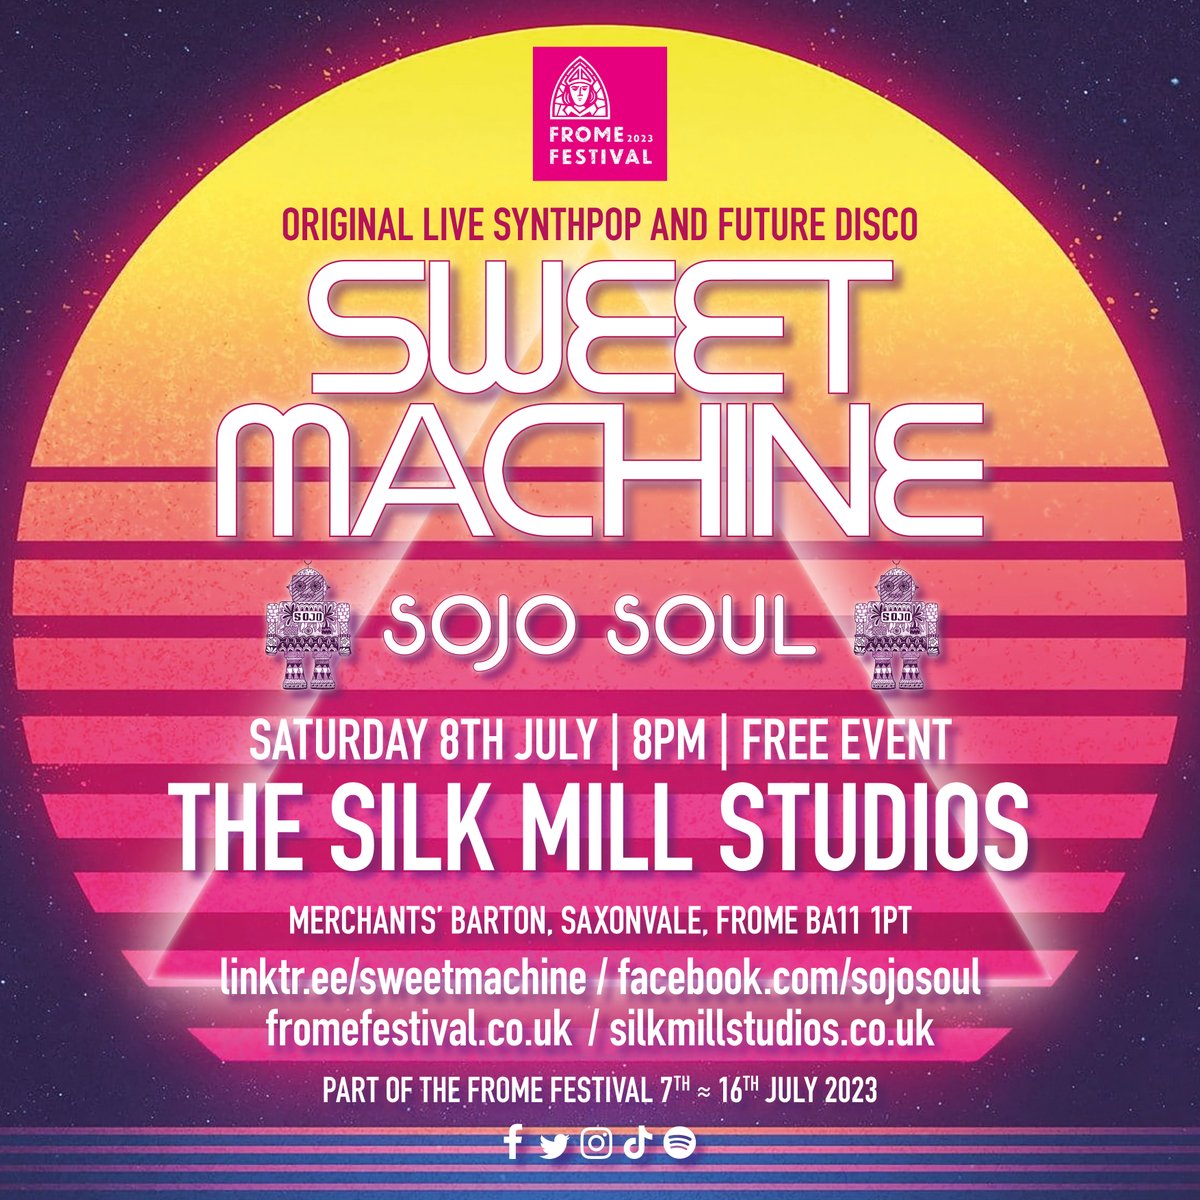 We're really excited to be back for @Frome_Festival with a FREE GIG on July 8th @SilkMillStudios along with the electro-disco skills of @SojoSoul #dancing #bar #neon #sunset #synthpop #synthwave #electropop #futuredisco #80s #frome #festival #saxonvale fromefestival.co.uk